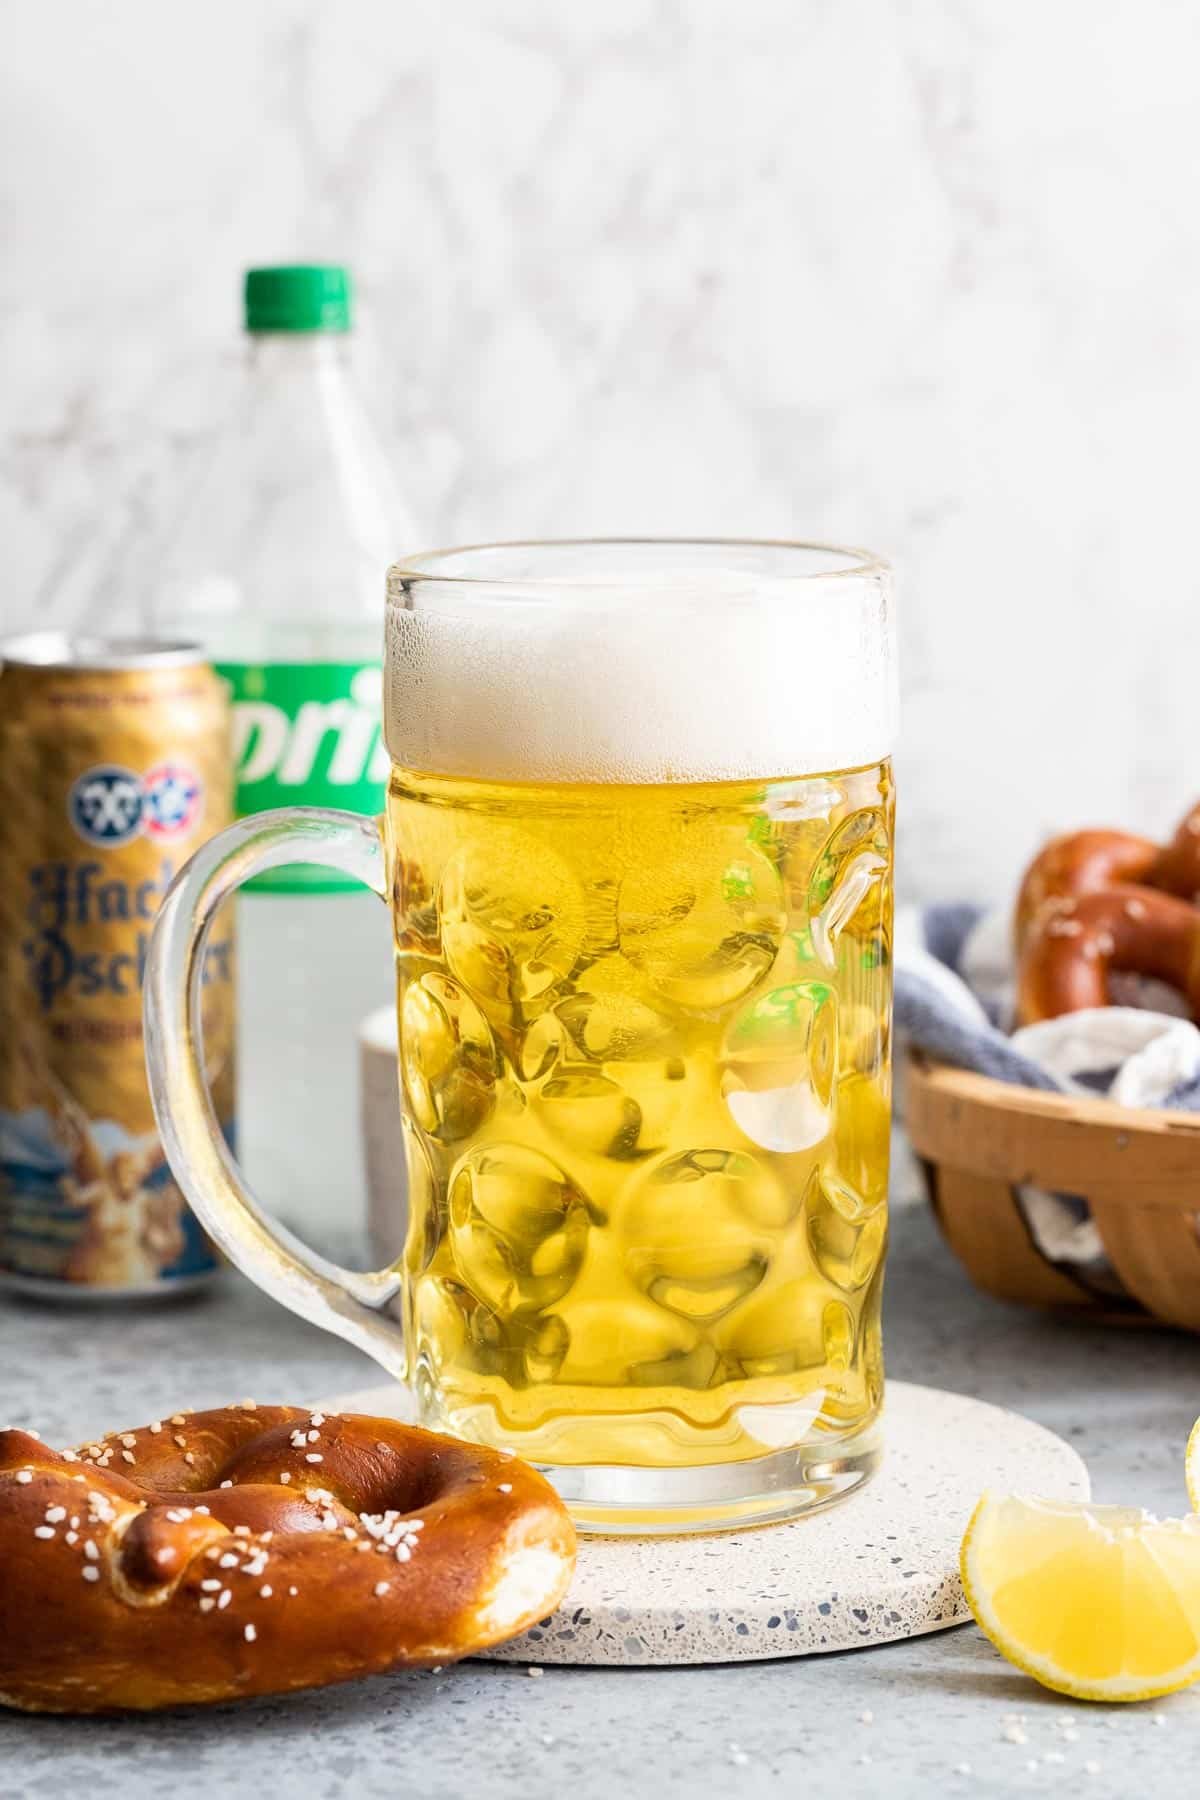 A beer stein next to a pretzel and a slice of lemon.